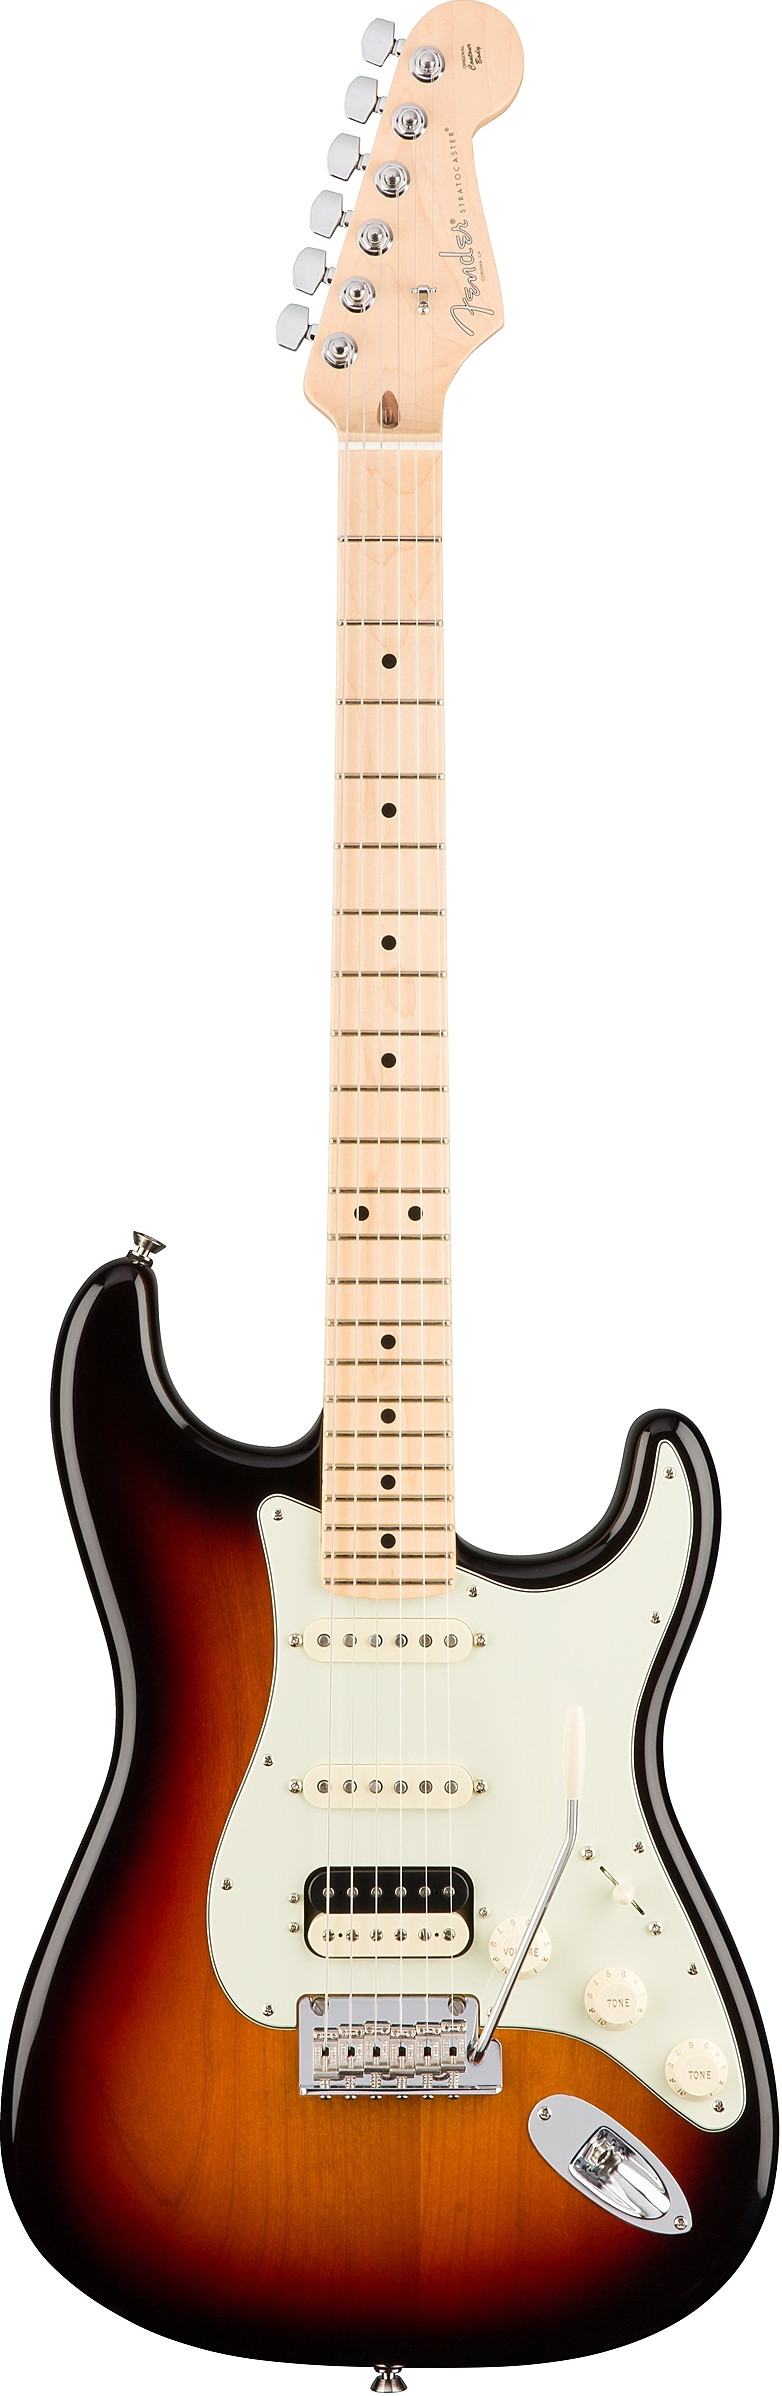 American Professional Stratocaster HSS Shawbucker by Fender